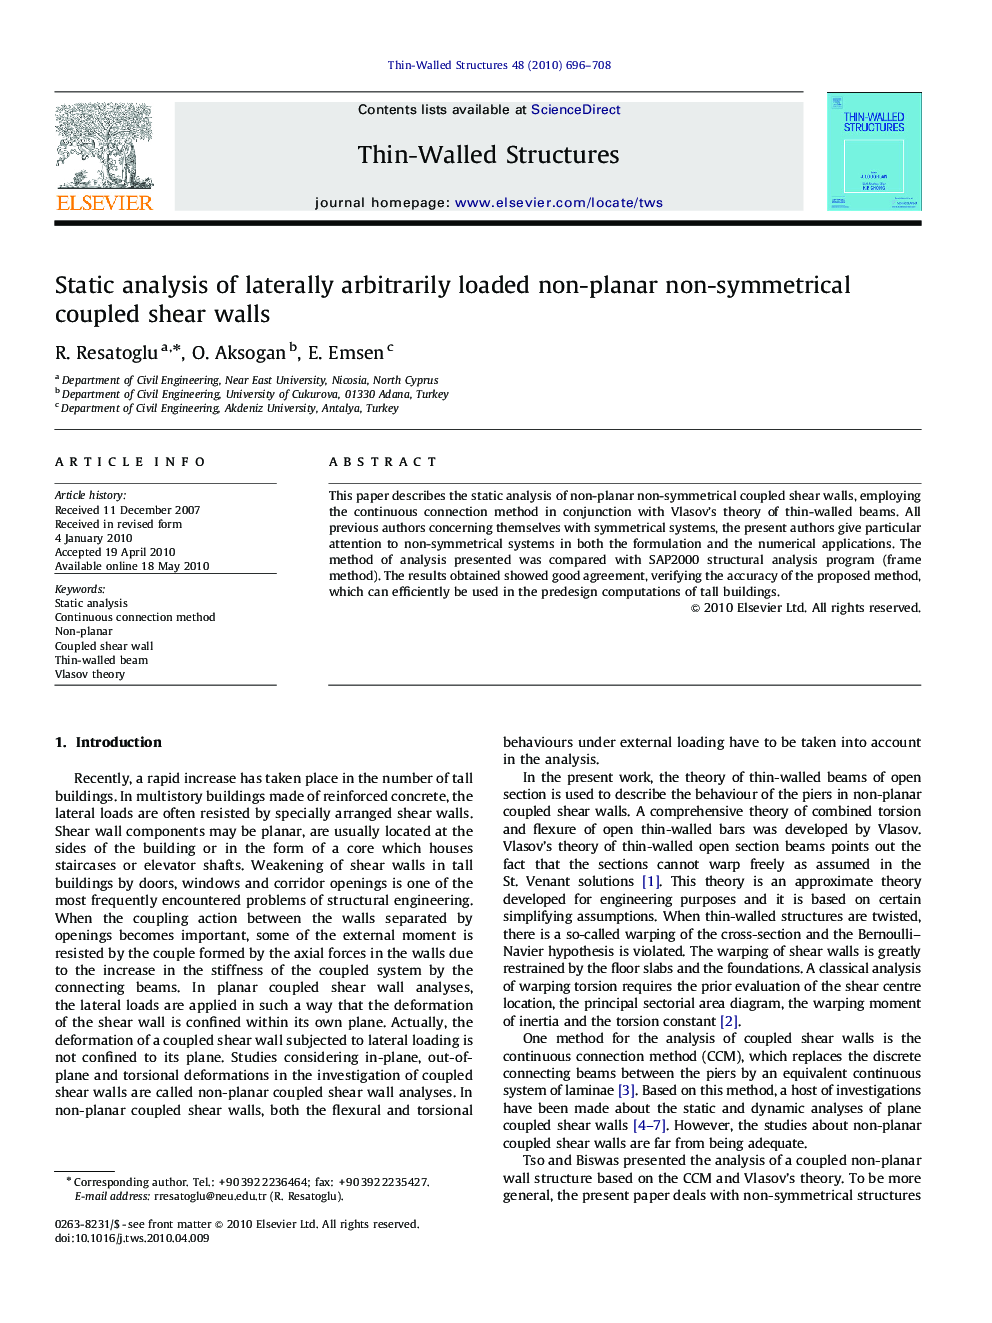 Static analysis of laterally arbitrarily loaded non-planar non-symmetrical coupled shear walls